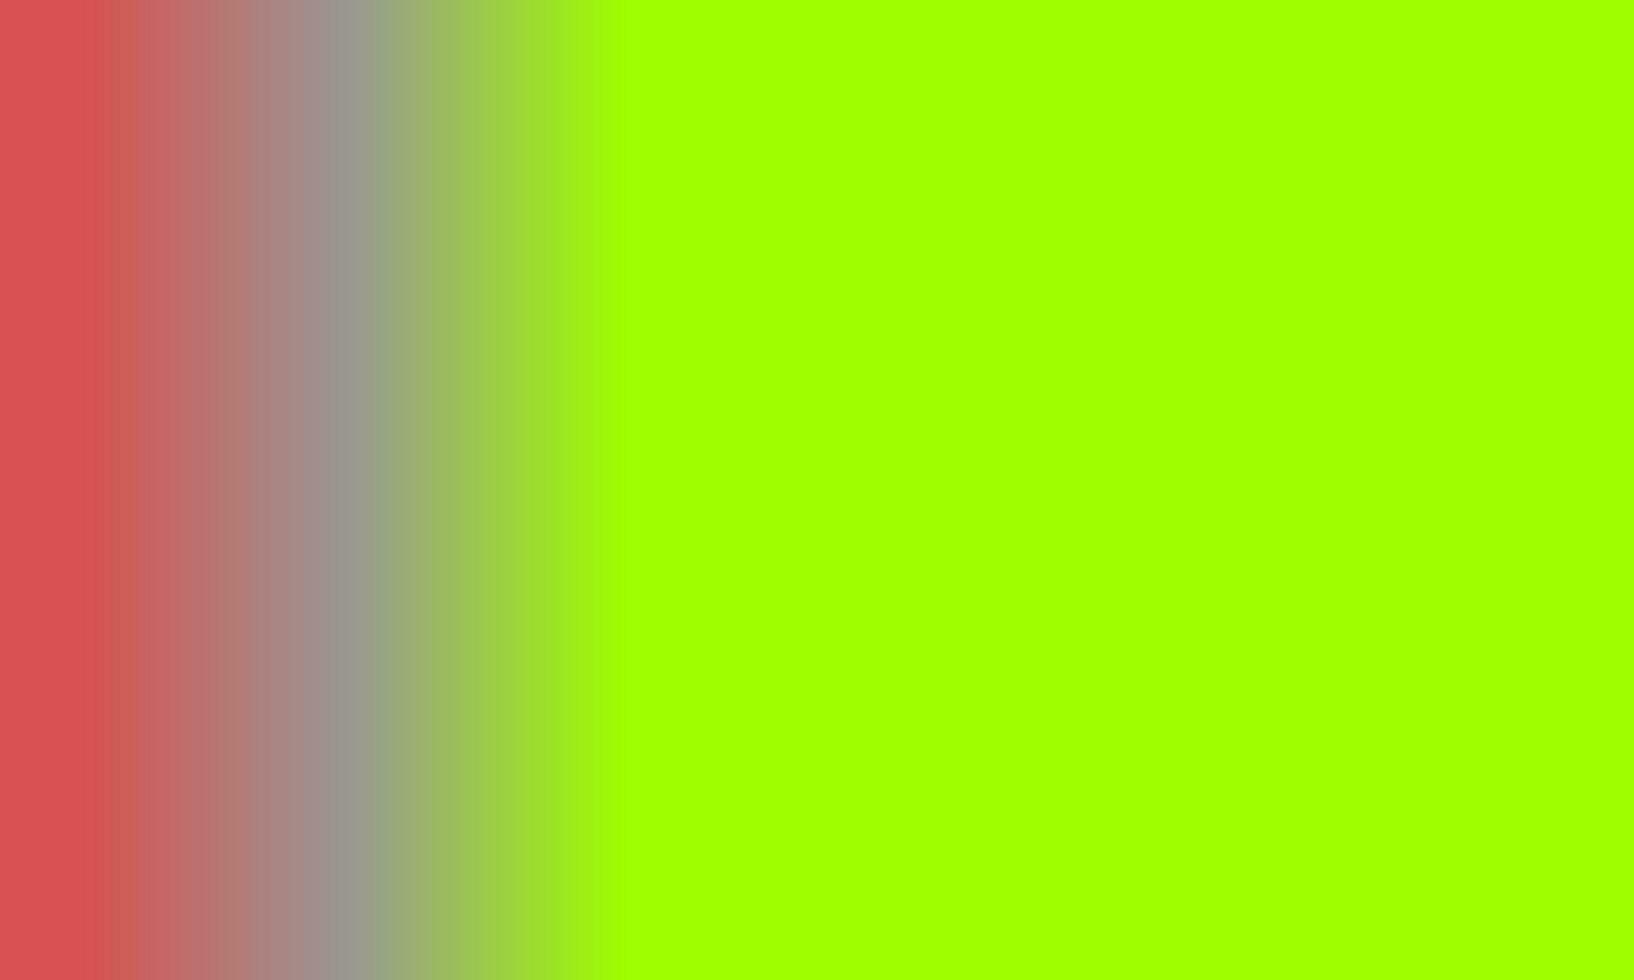 Design simple highlighter green,red and grey gradient color illustration background photo